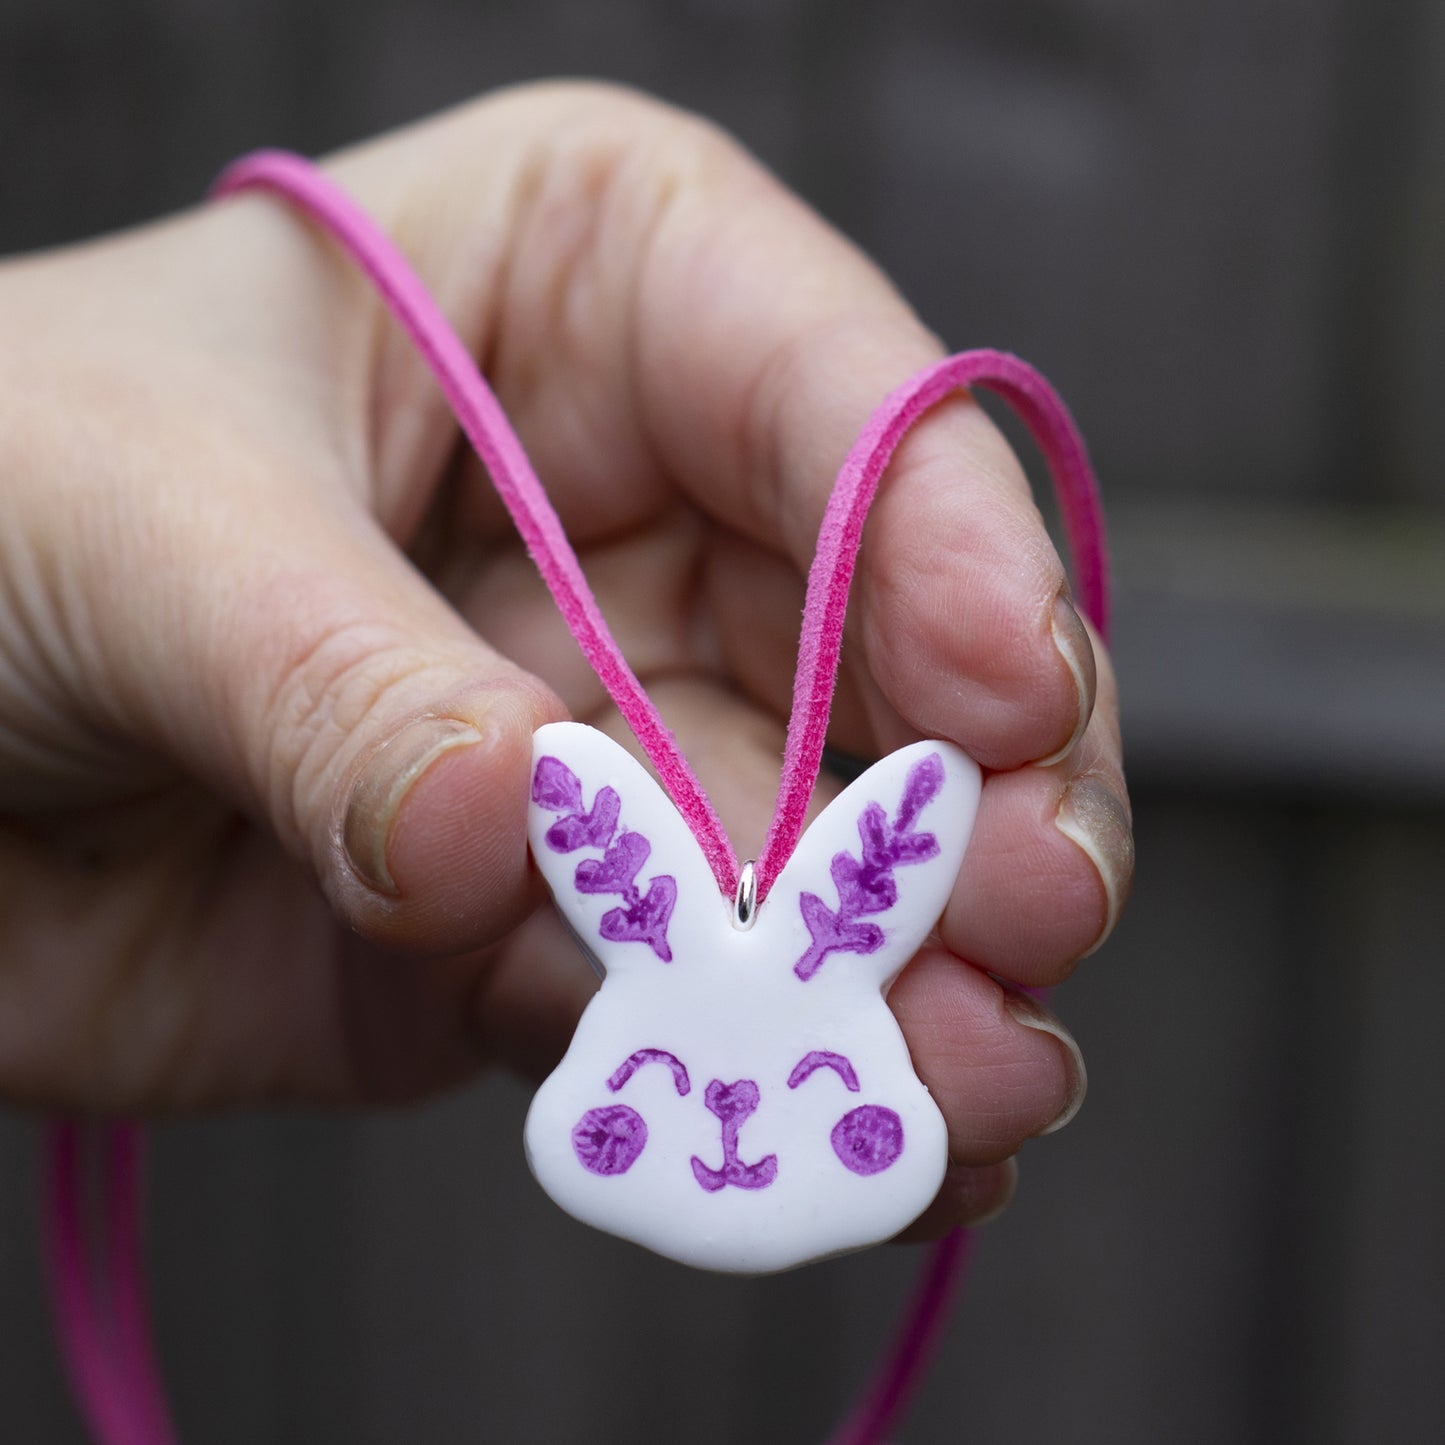 Girls' Rabbit Necklace, Ideal Gift For Kids